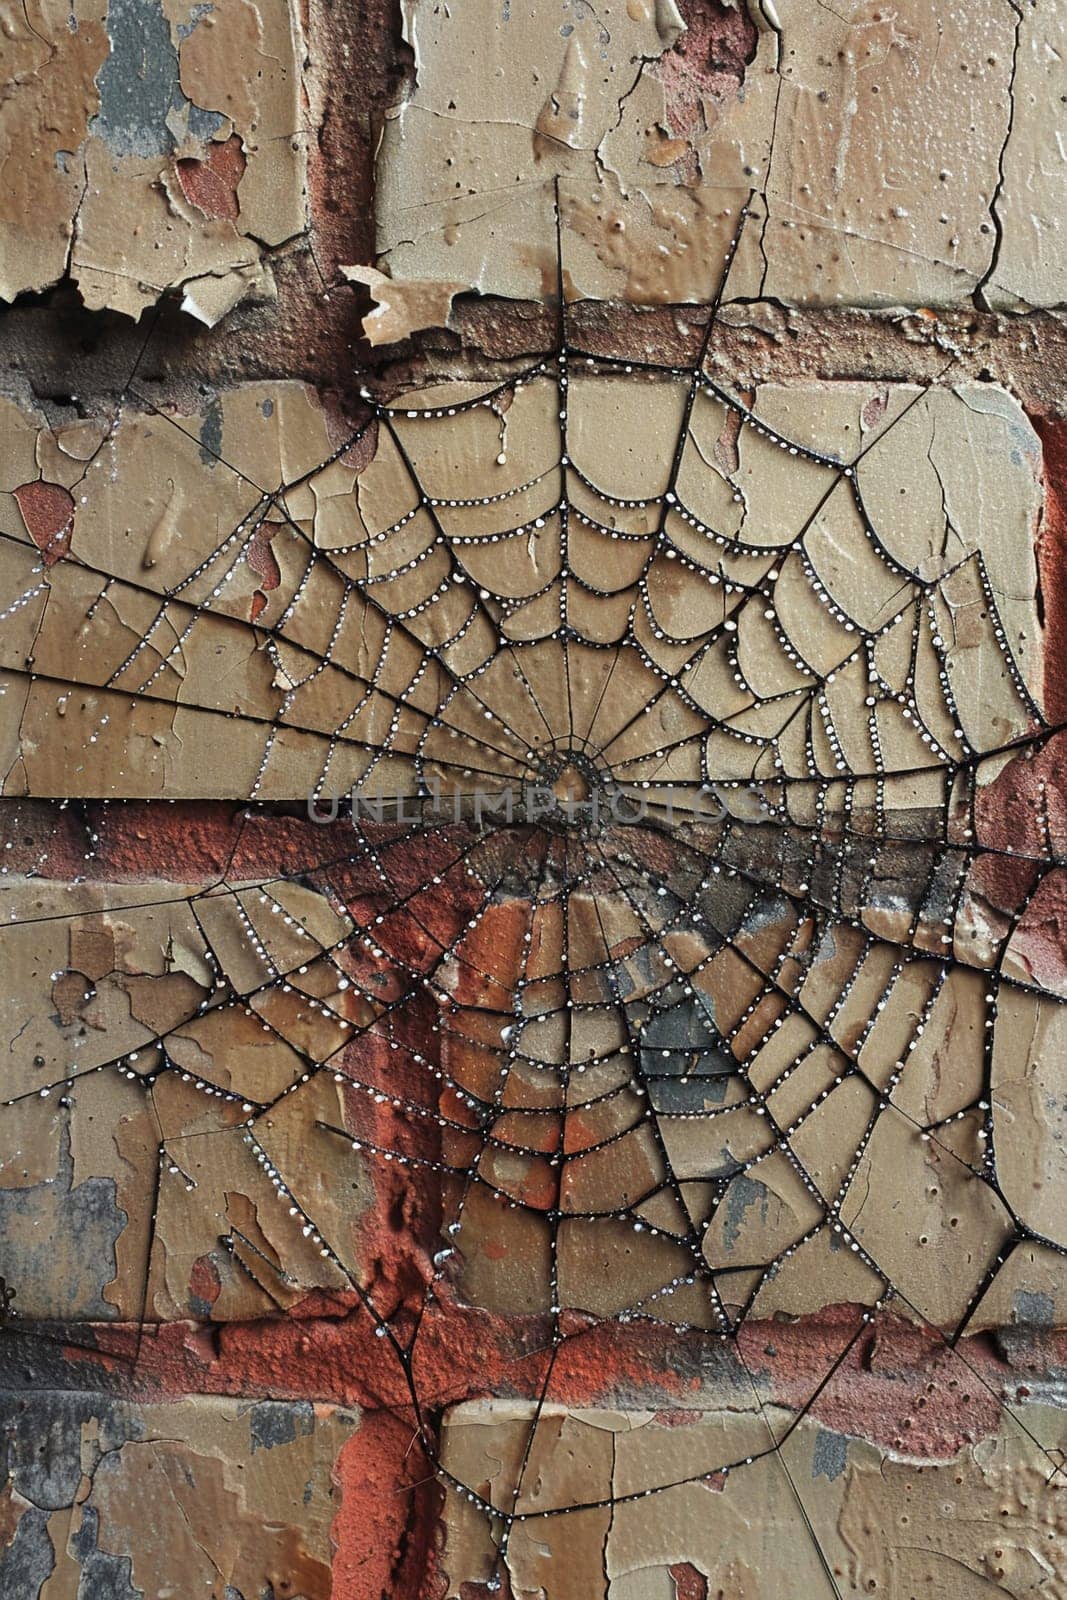 Glistening raindrops on a spider web capturing the intricacy and beauty of nature. Old brick wall with peeling paint by Benzoix